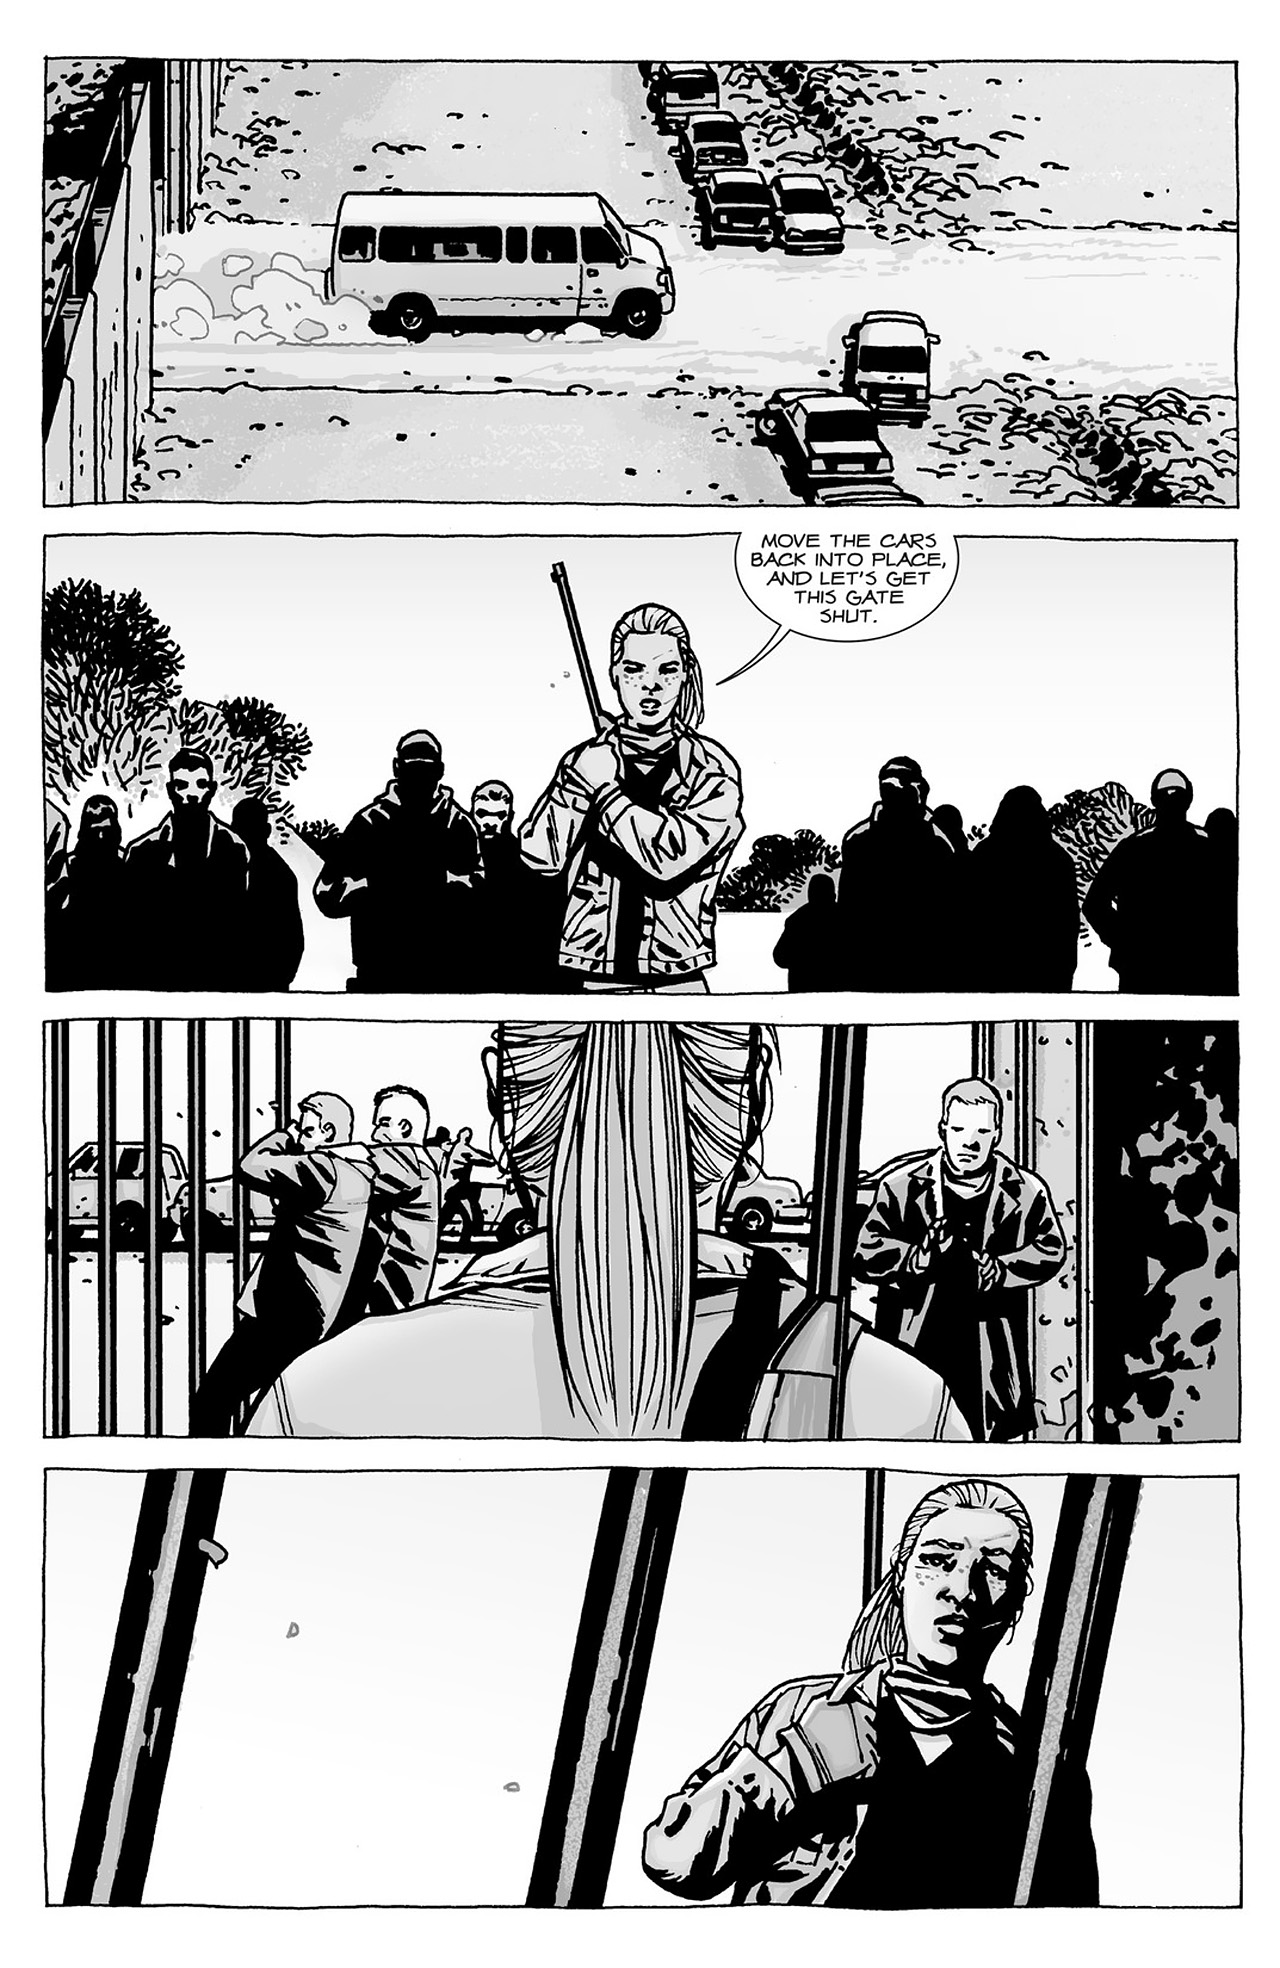 THE WALKING DEAD 99 - SOMETHING TO FEAR, Part Three